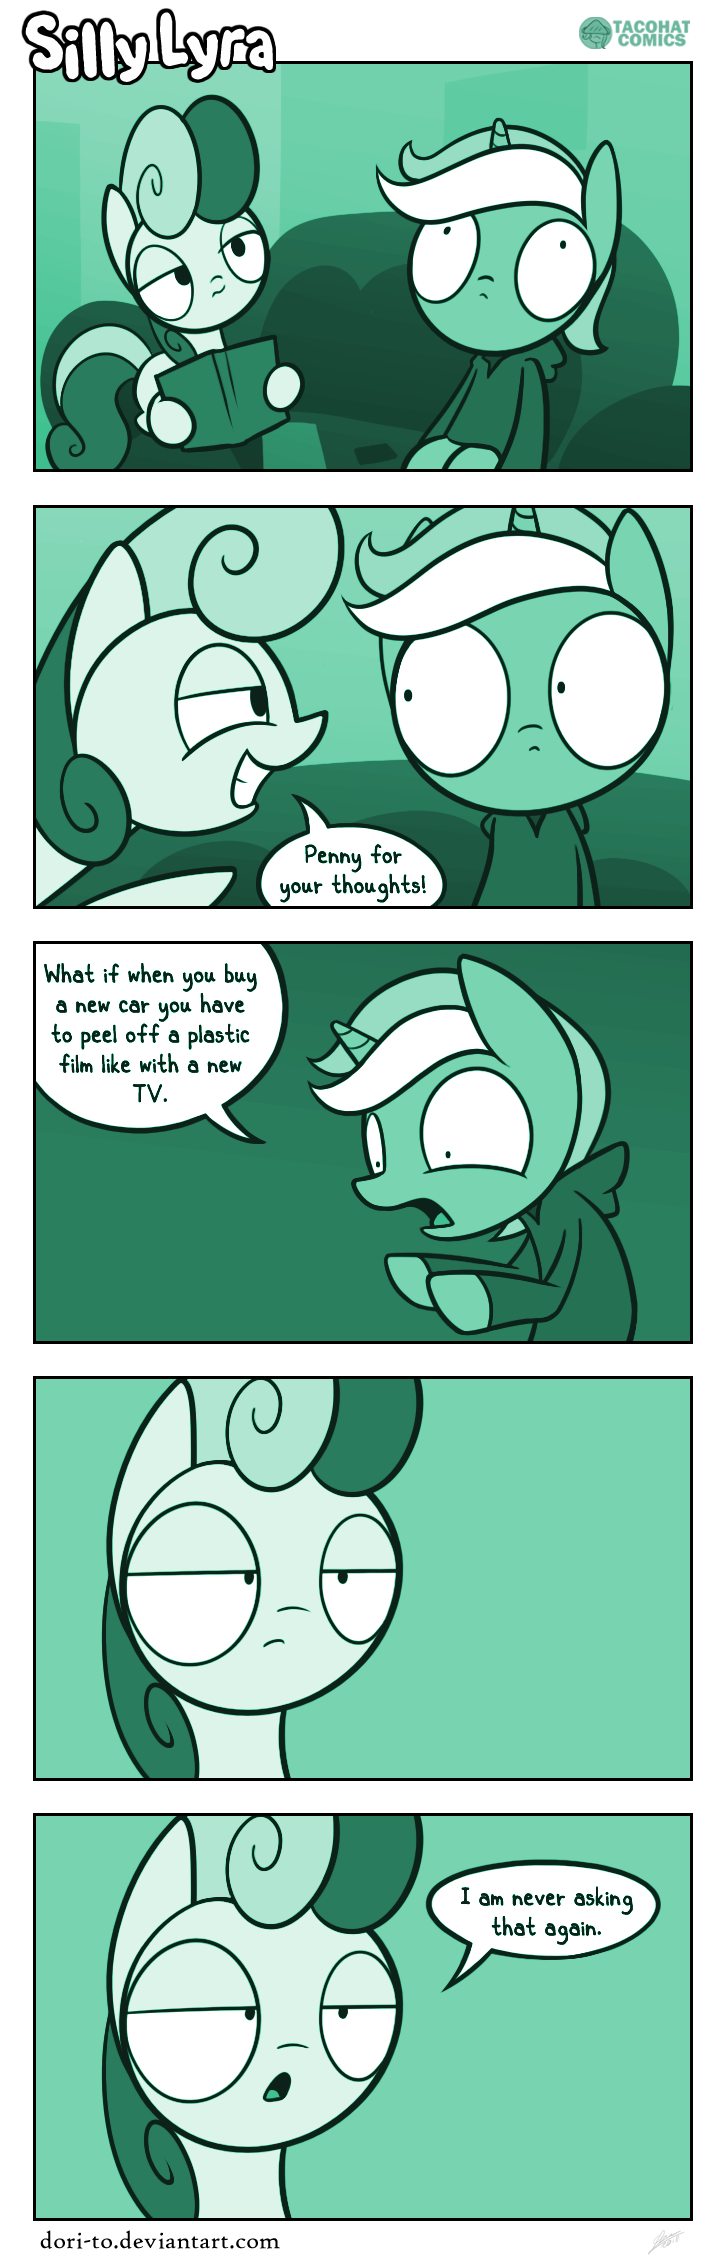 Silly Lyra - Deep Thoughts